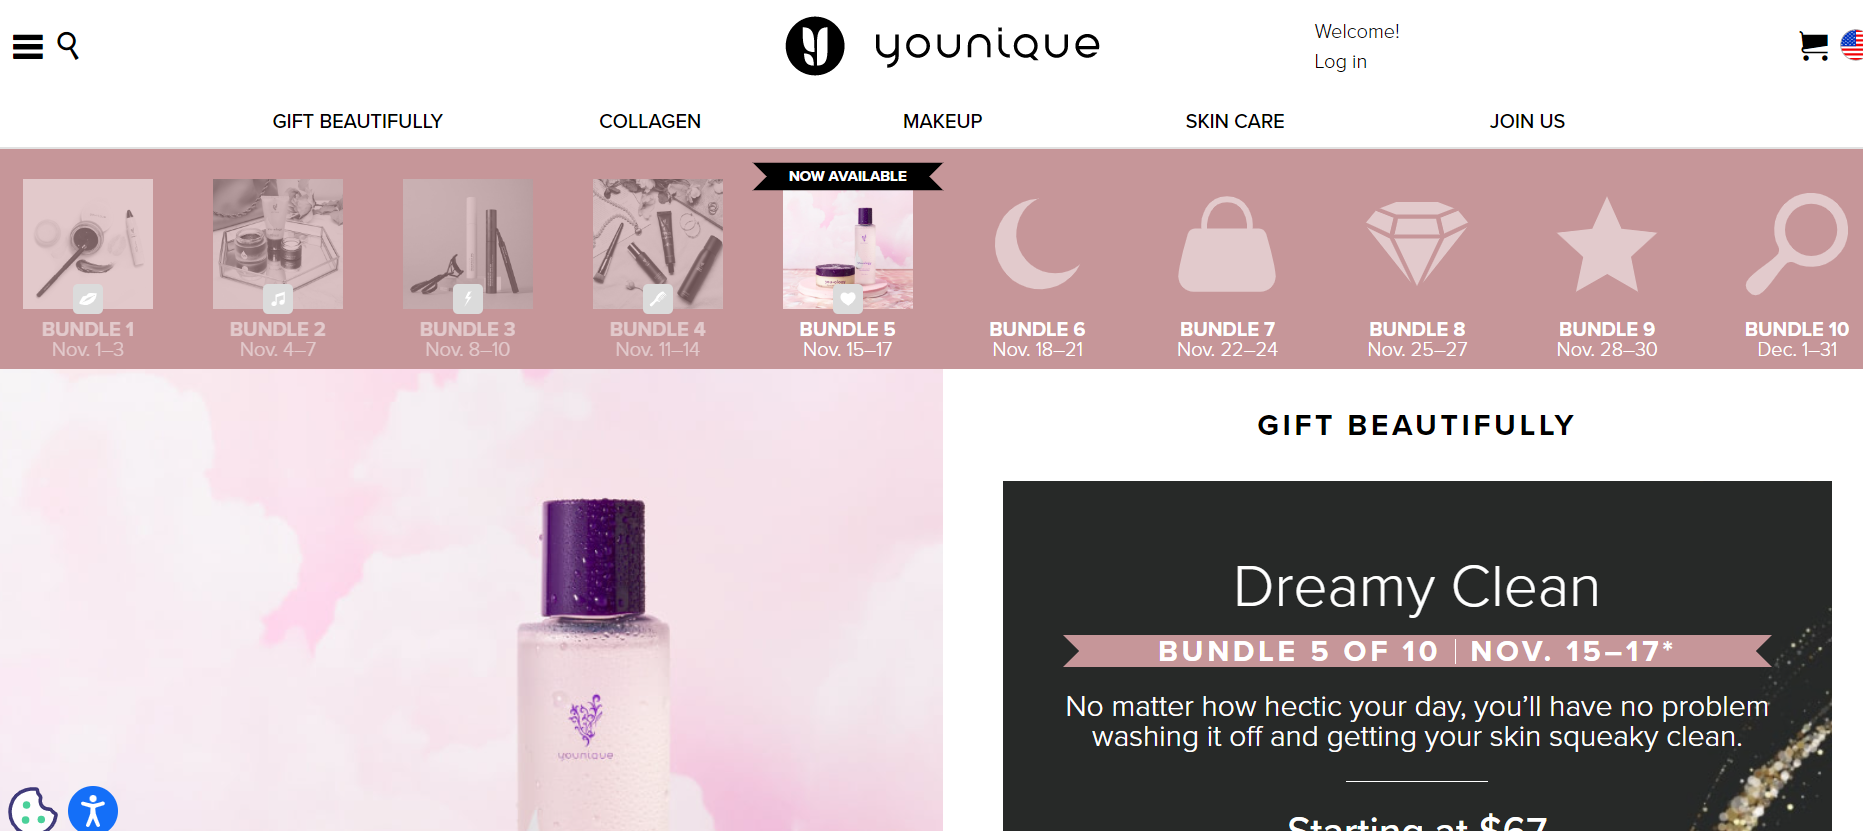 Younique Payquicker Account Login Guide